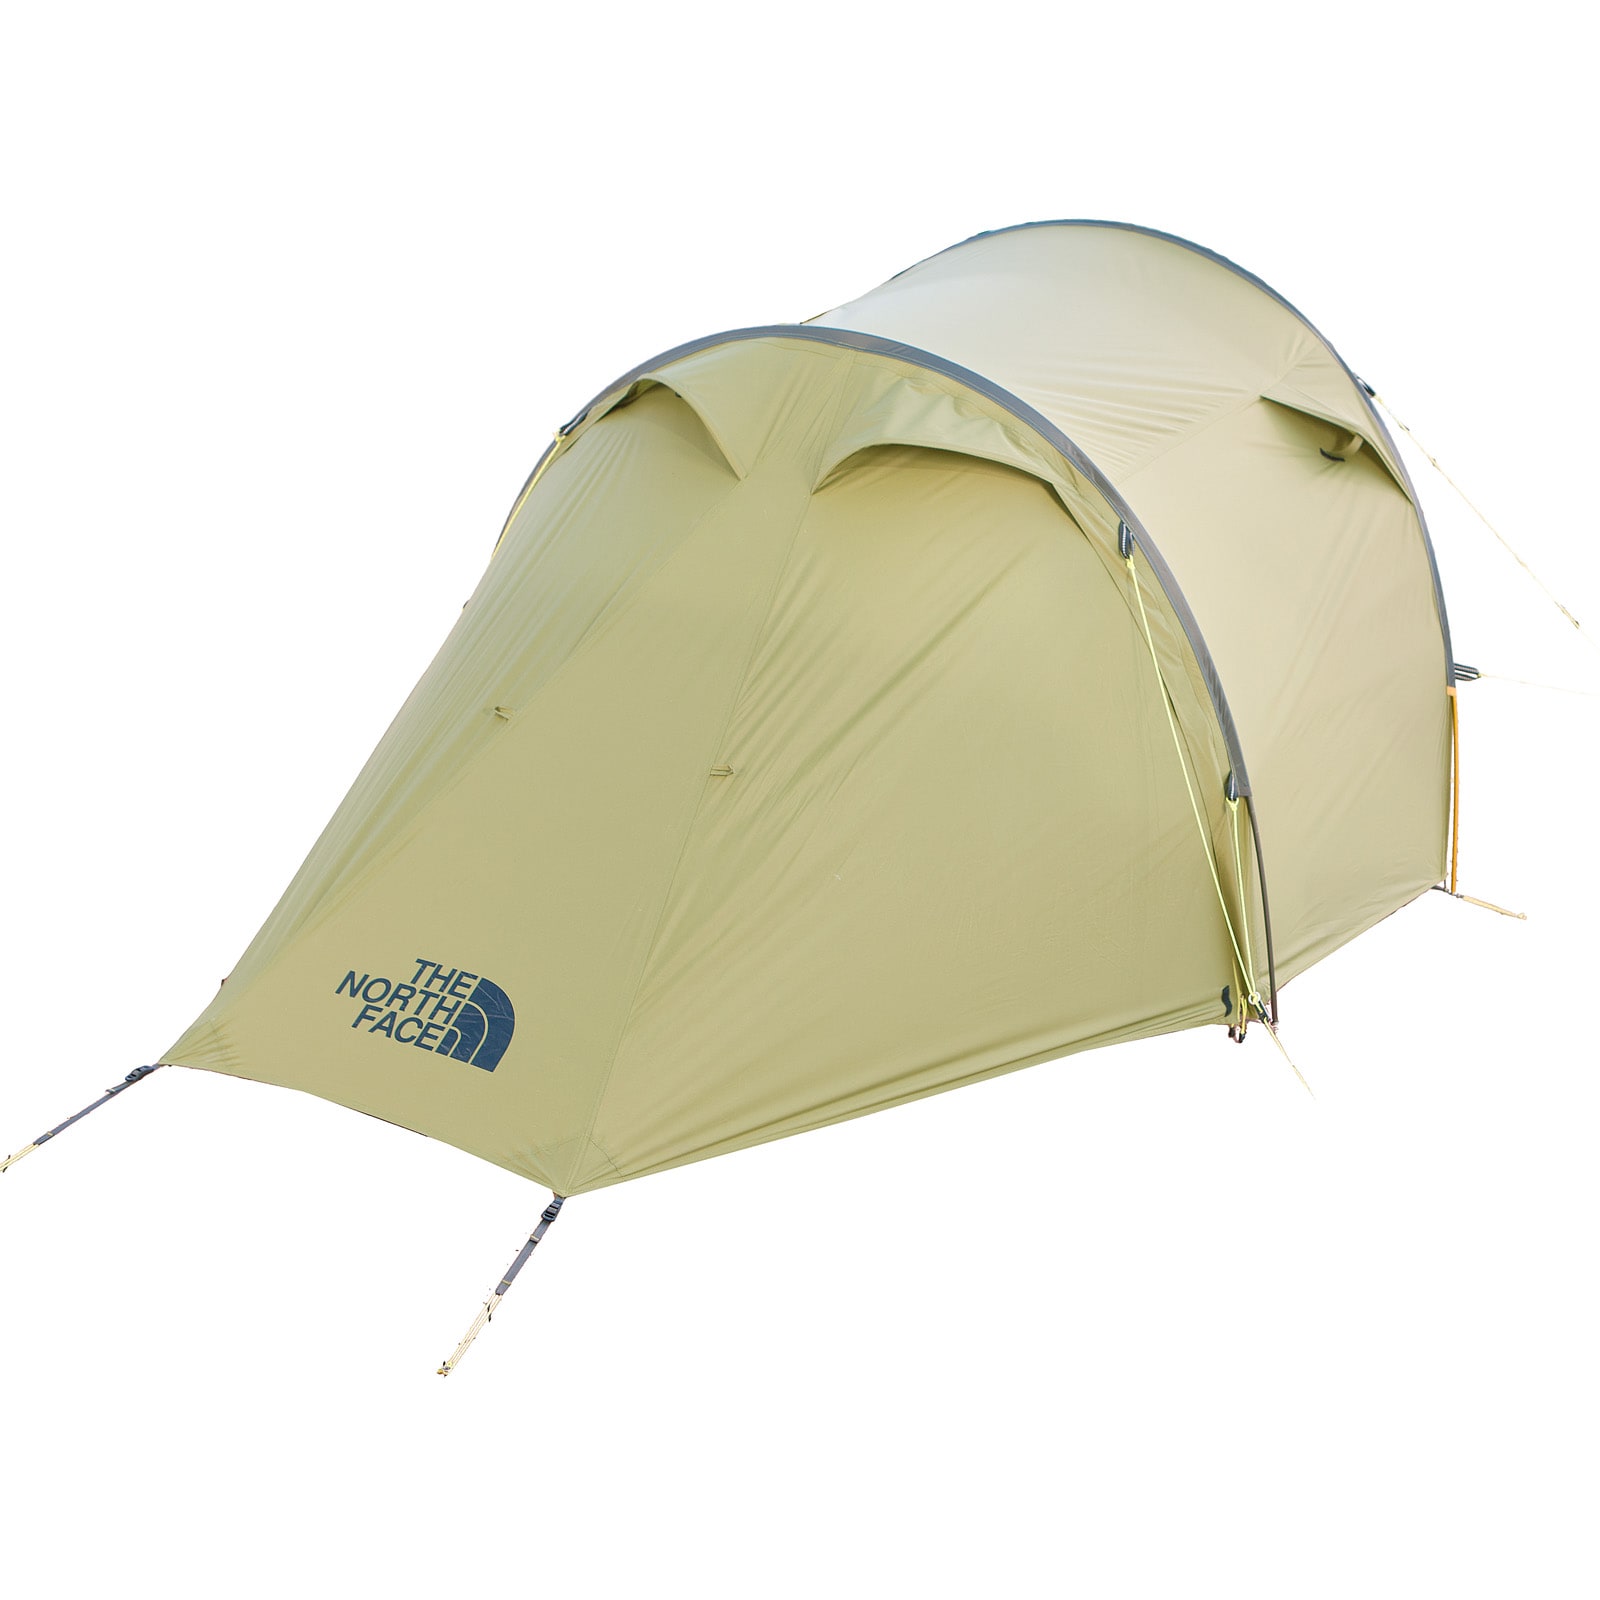 Buy The North Face Westwind 2 from Outnorth